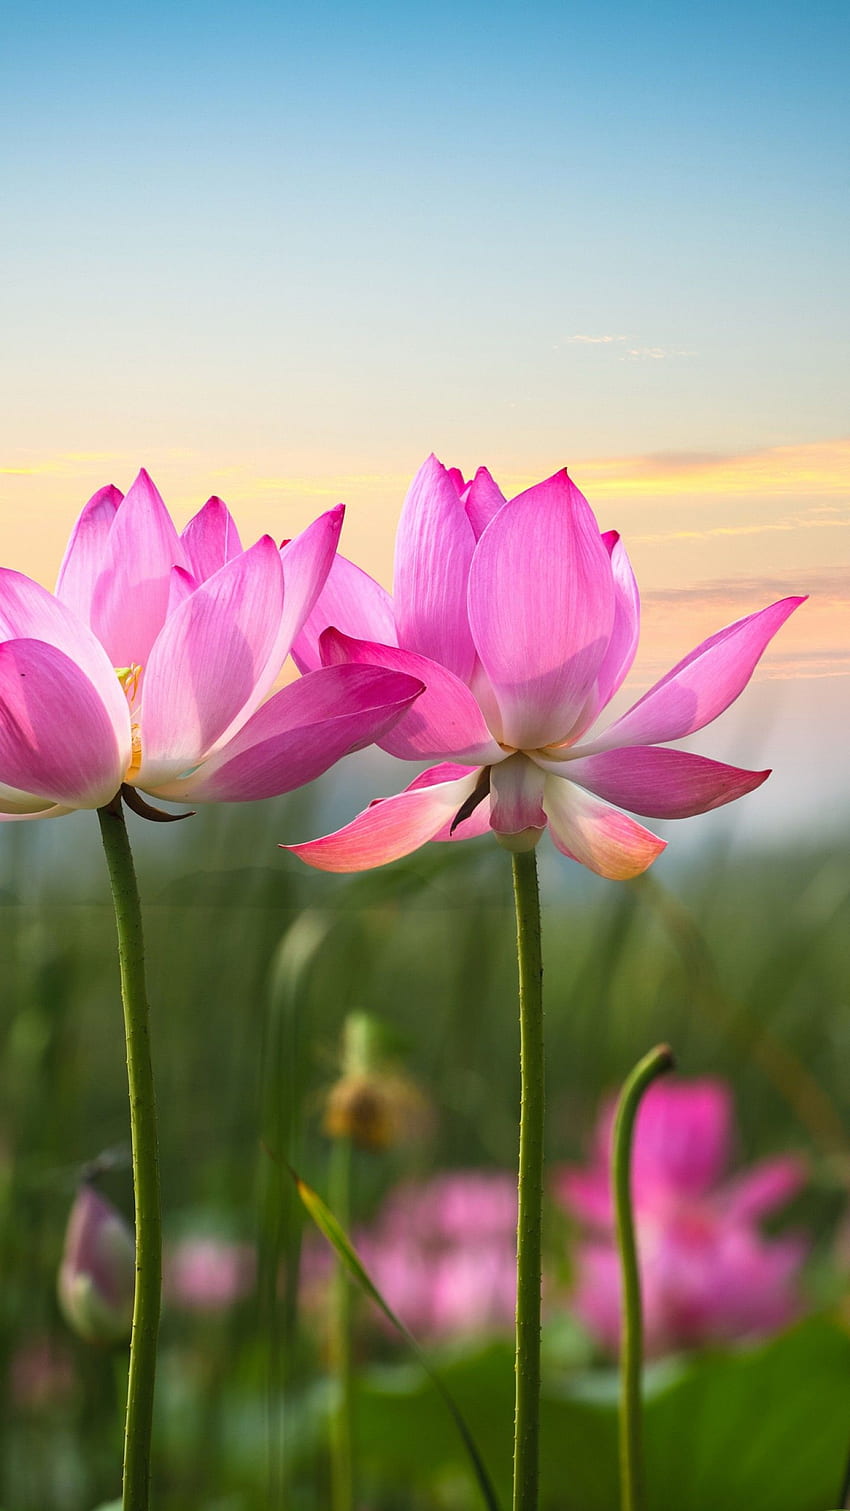 Lotus flowers, Pink flowers, , Flowers,. for iPhone, Android, Mobile and HD phone wallpaper